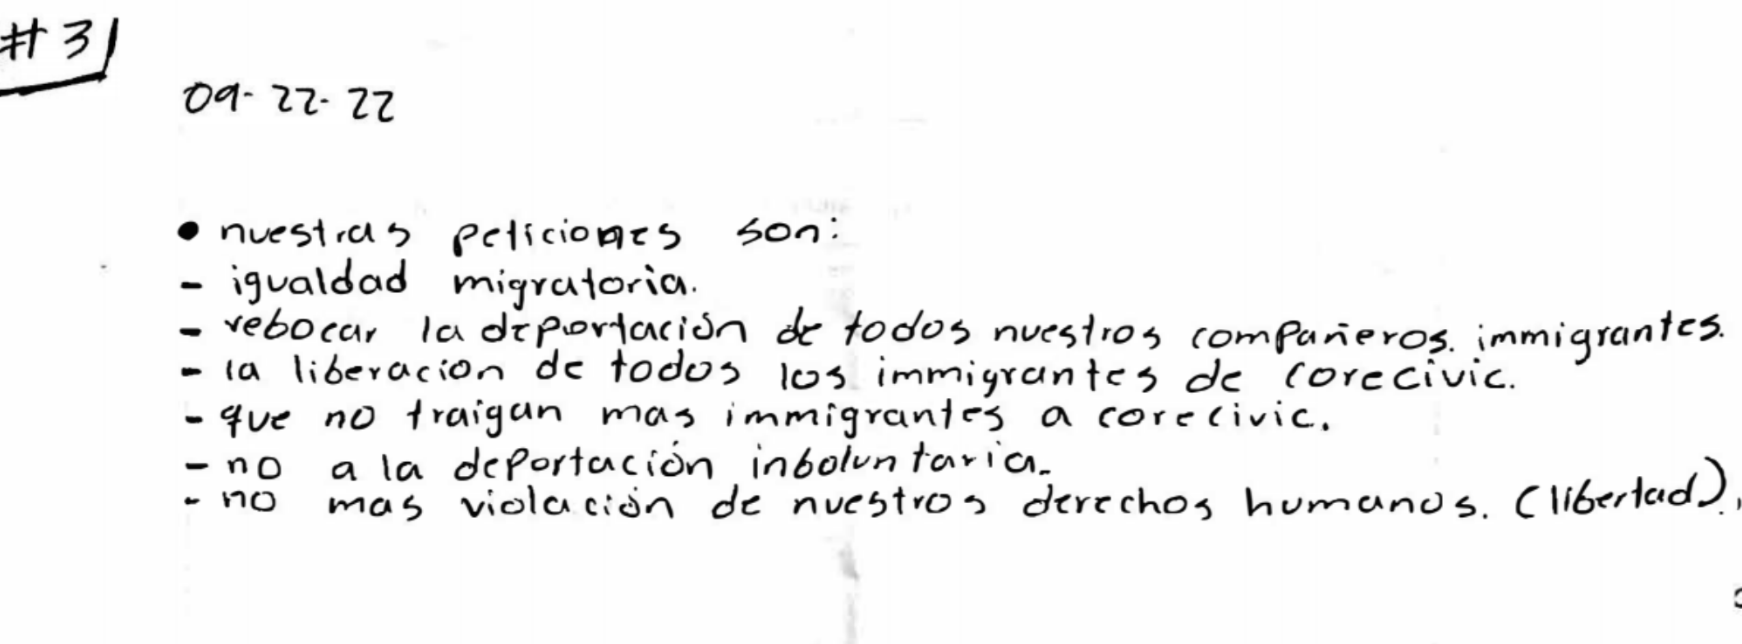 An excerpt of an open letter hand-written by immigrants detained at Torrance County Detention Facility in New Mexico